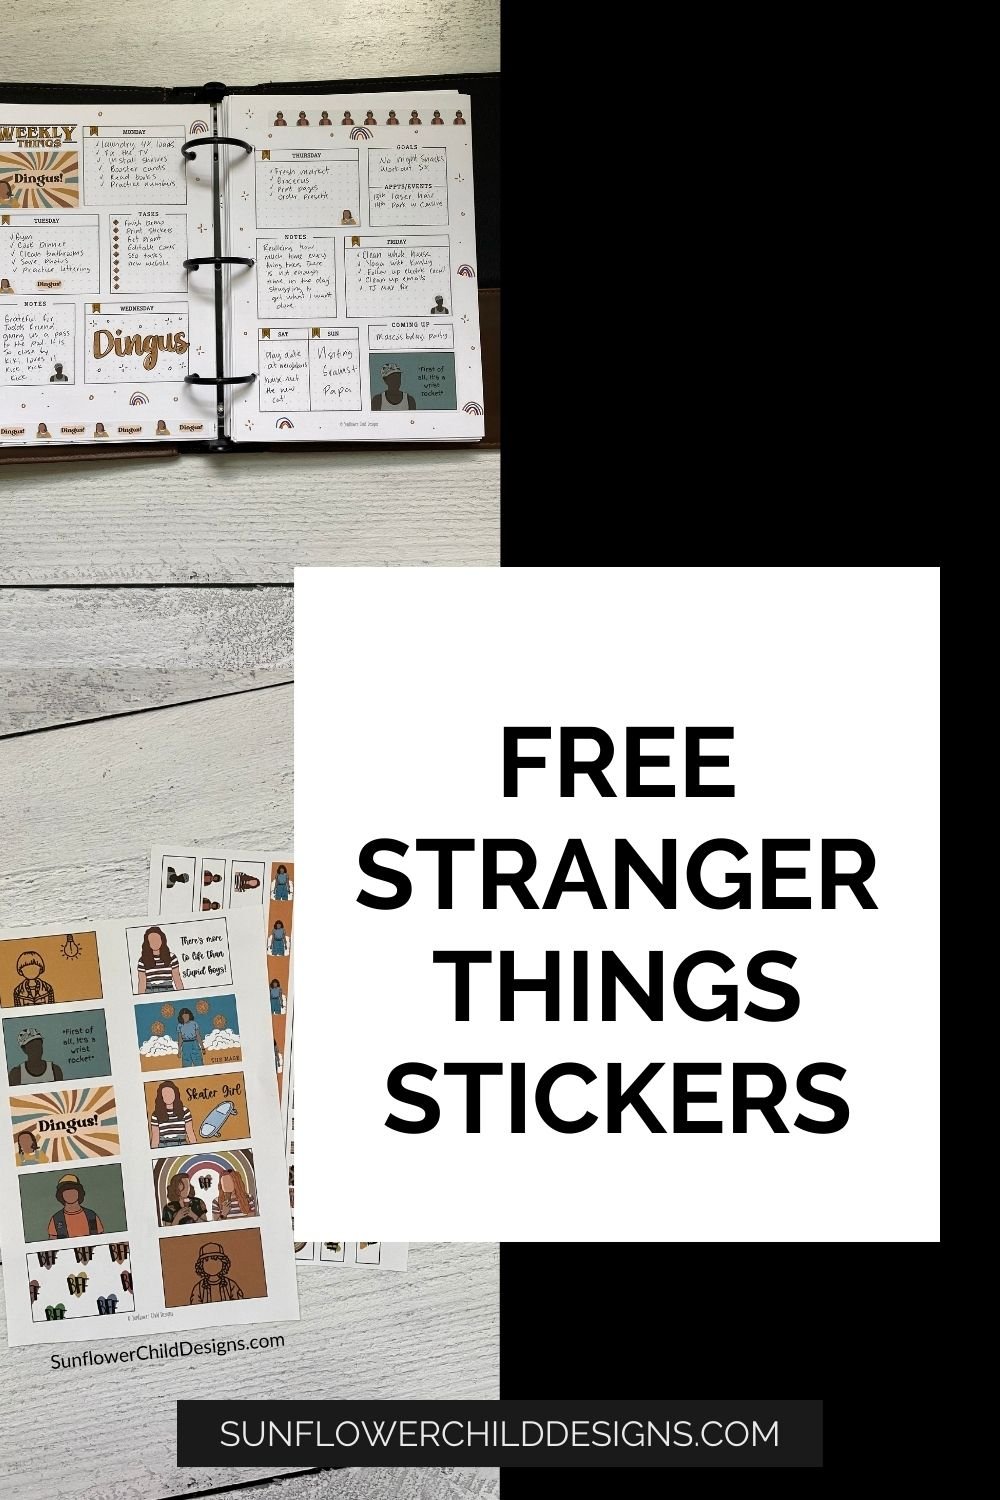 Unleash Your Creativity with FREE Stranger Things Stickers